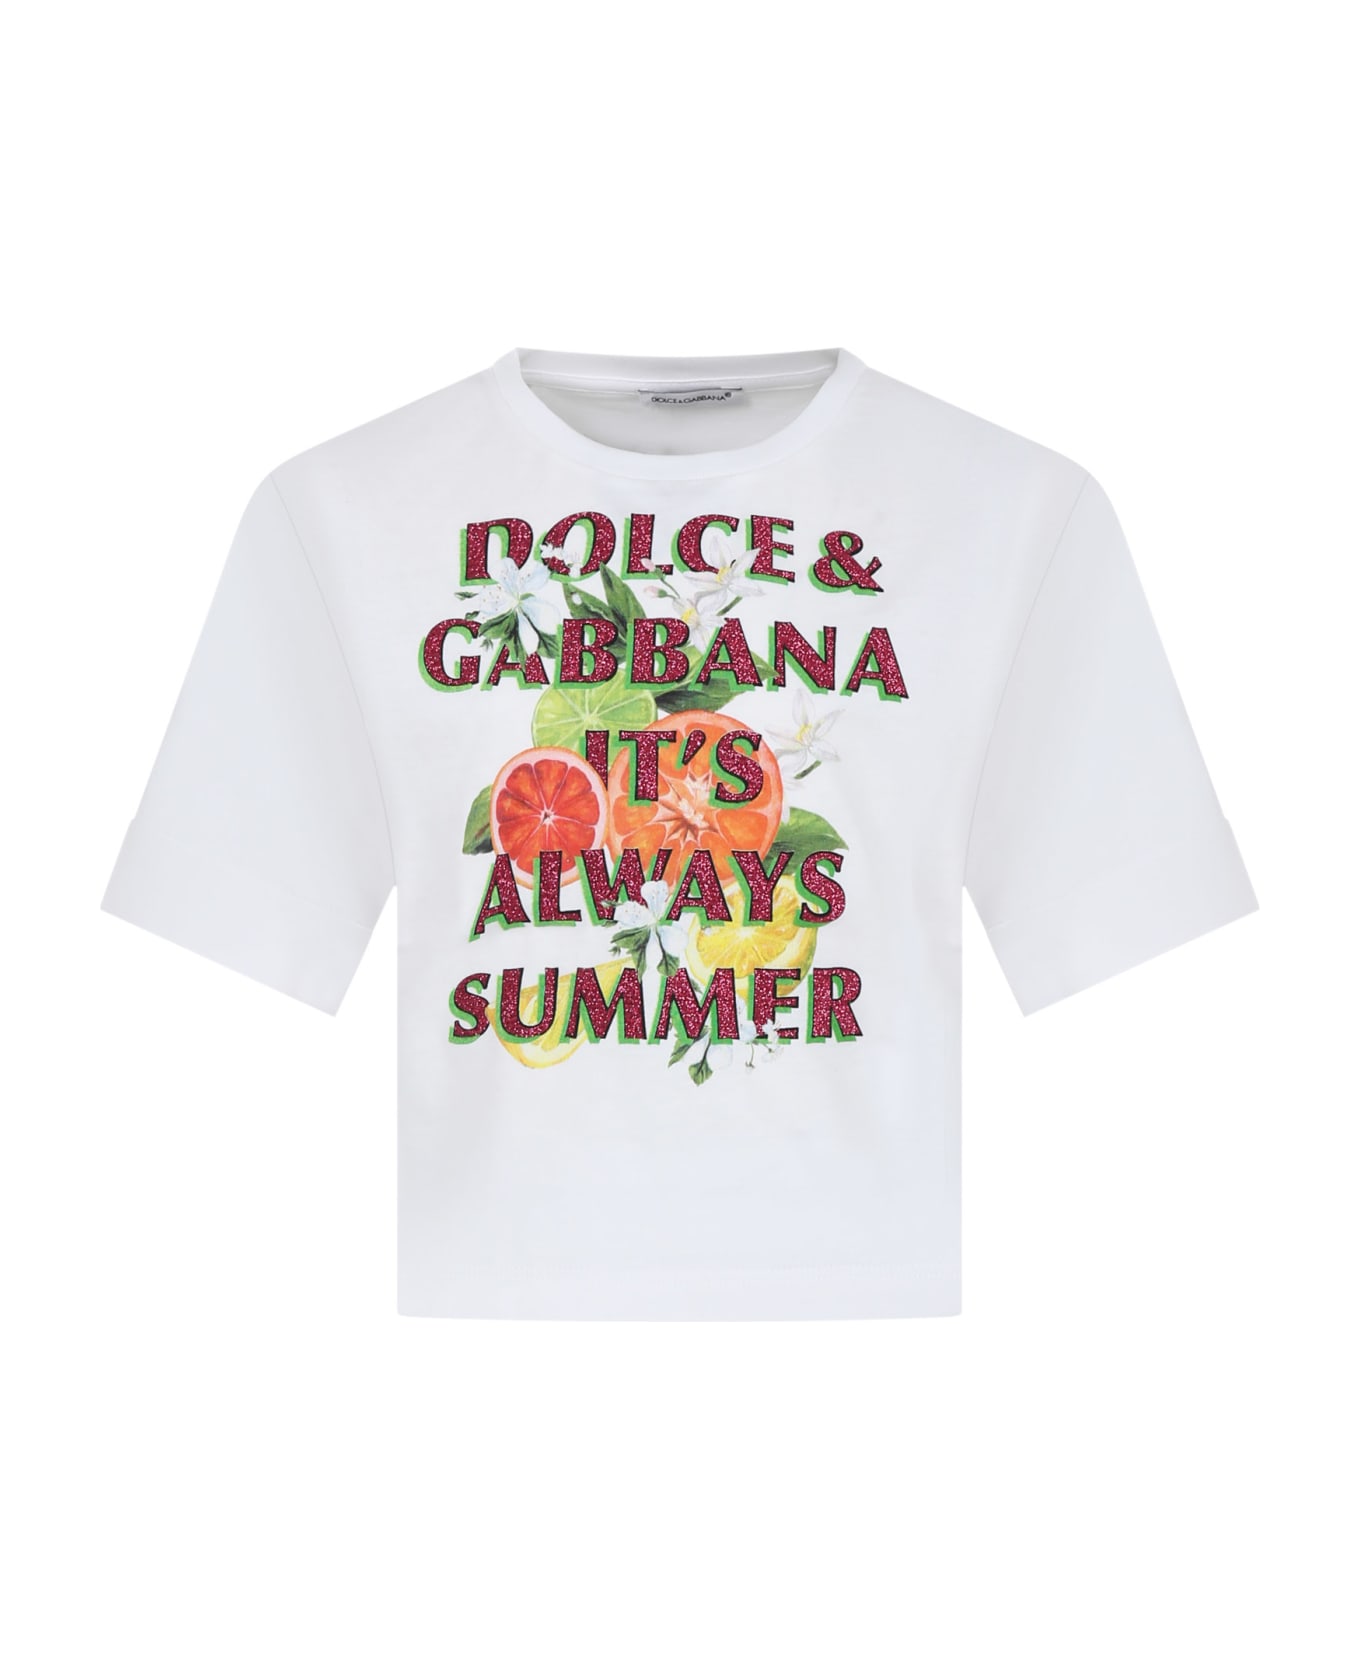 Dolce & Gabbana White T-shirt For Girl With Multicolor Print - White